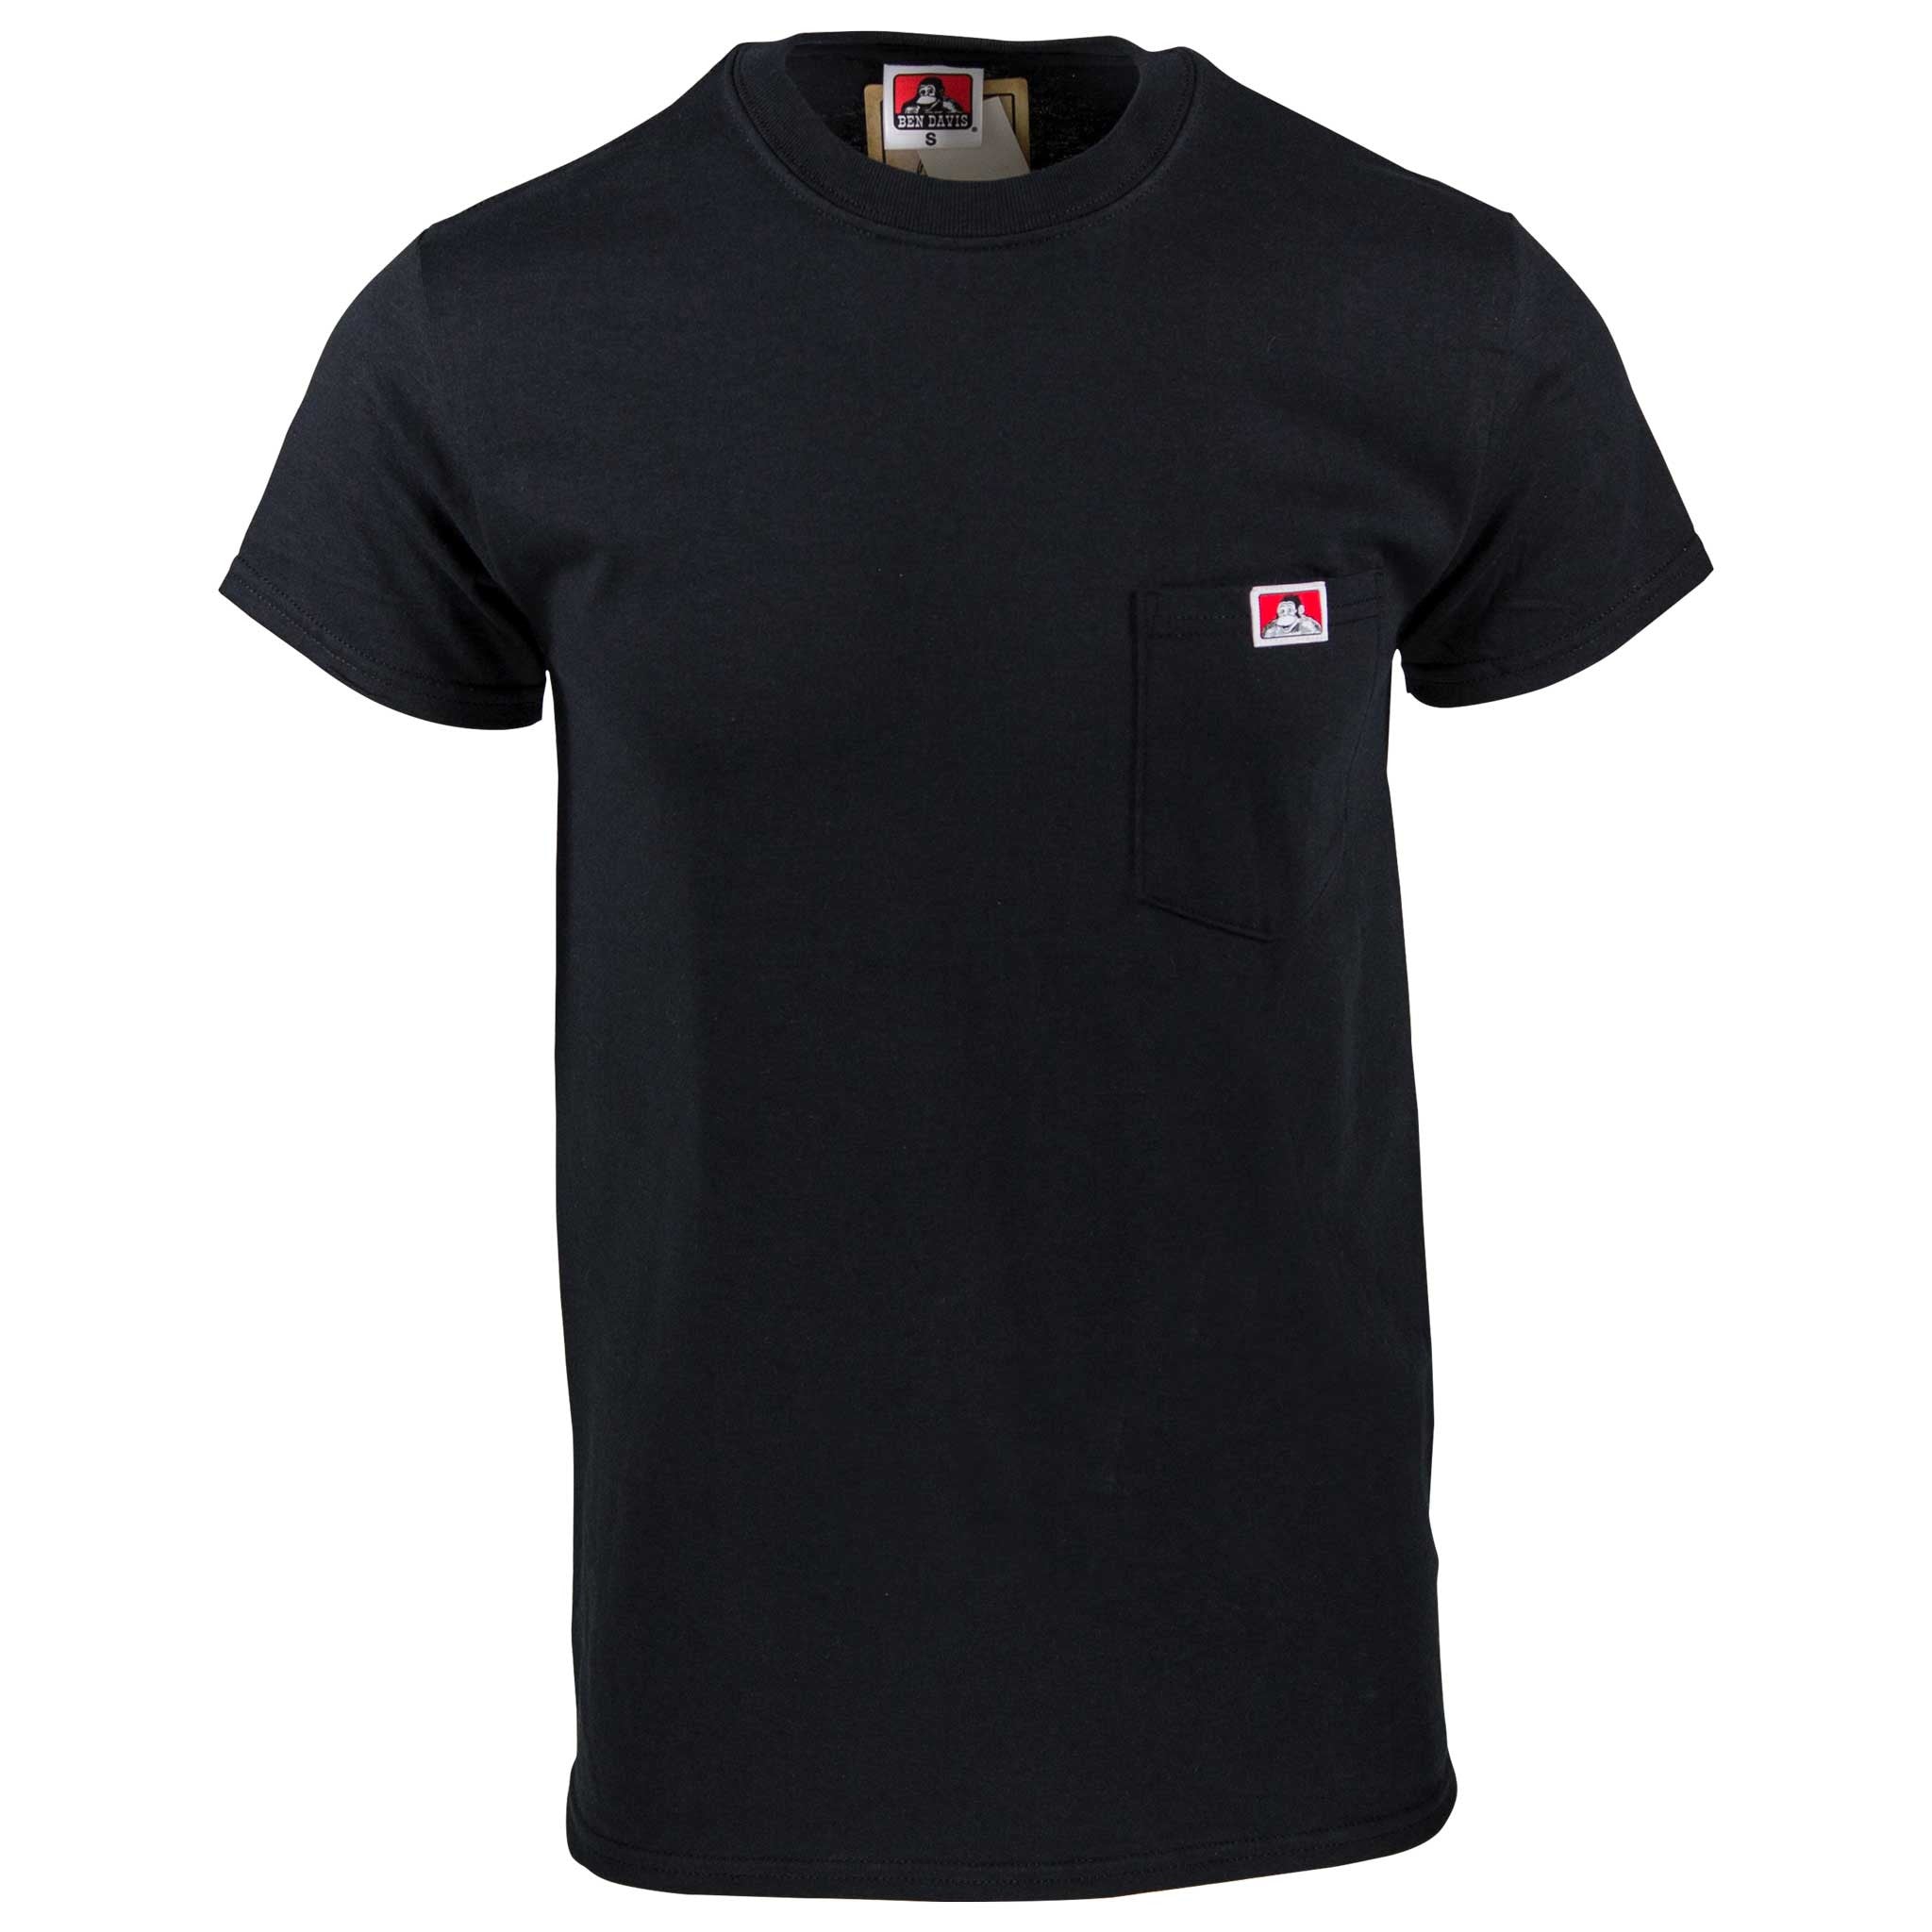 Classic S/S T-Shirt in Black